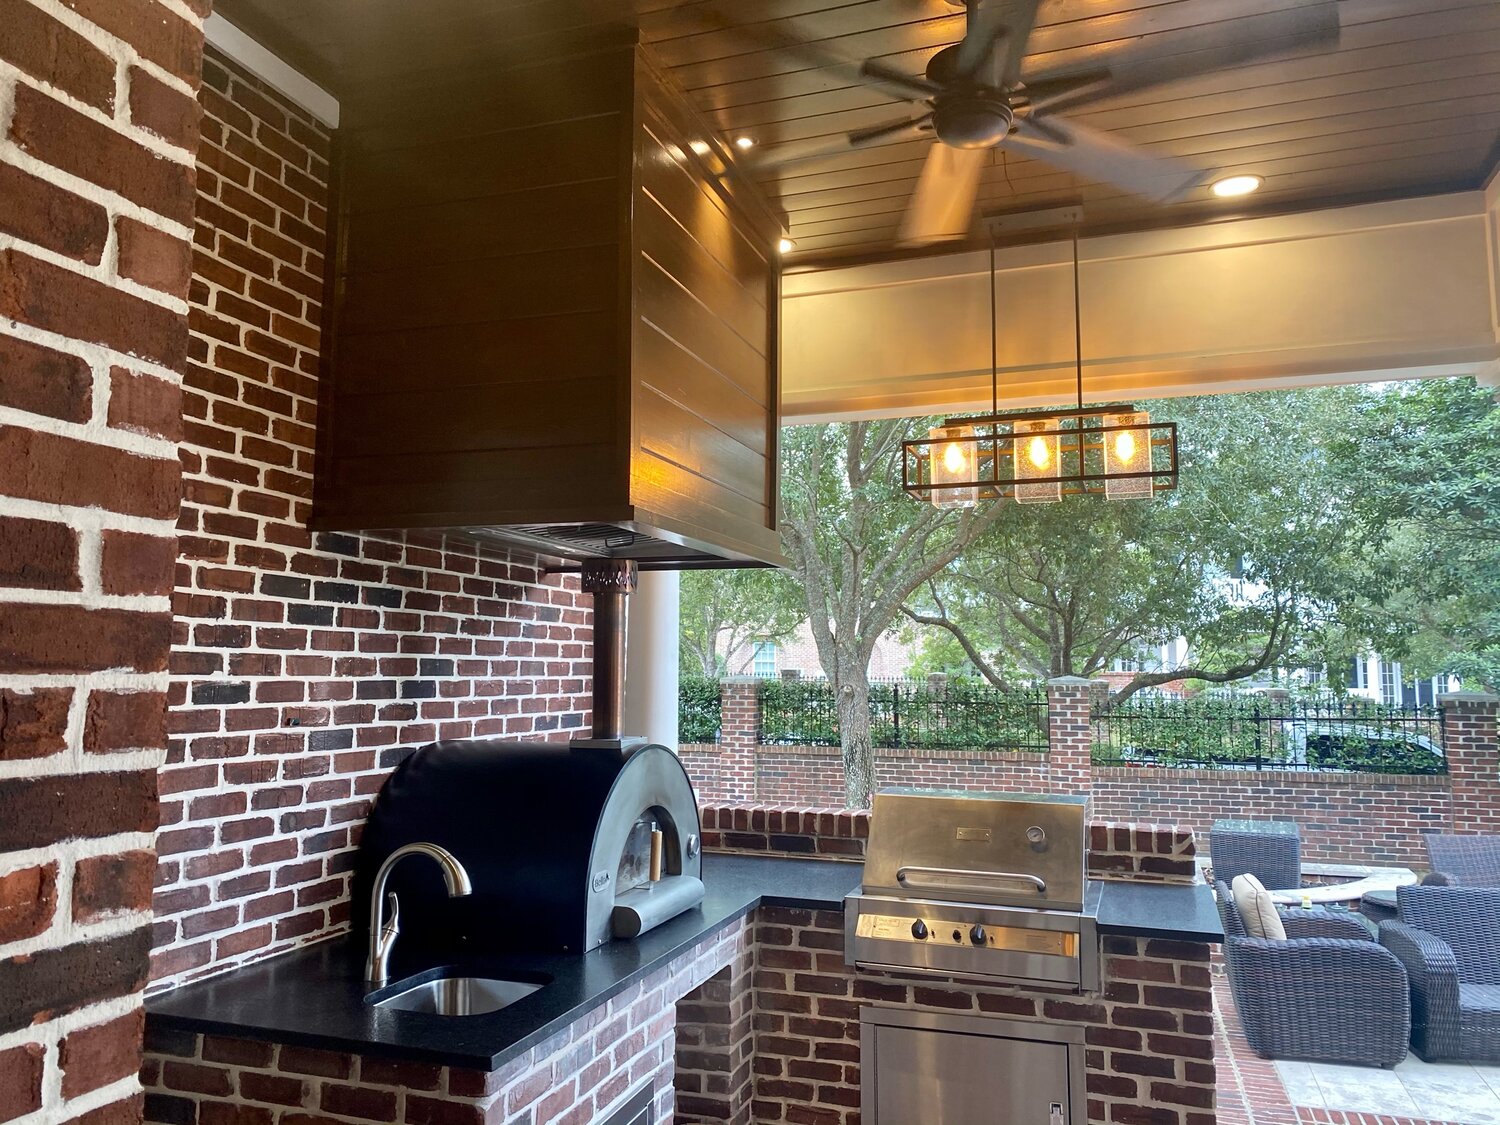 Should You Cover an Outdoor Kitchen?